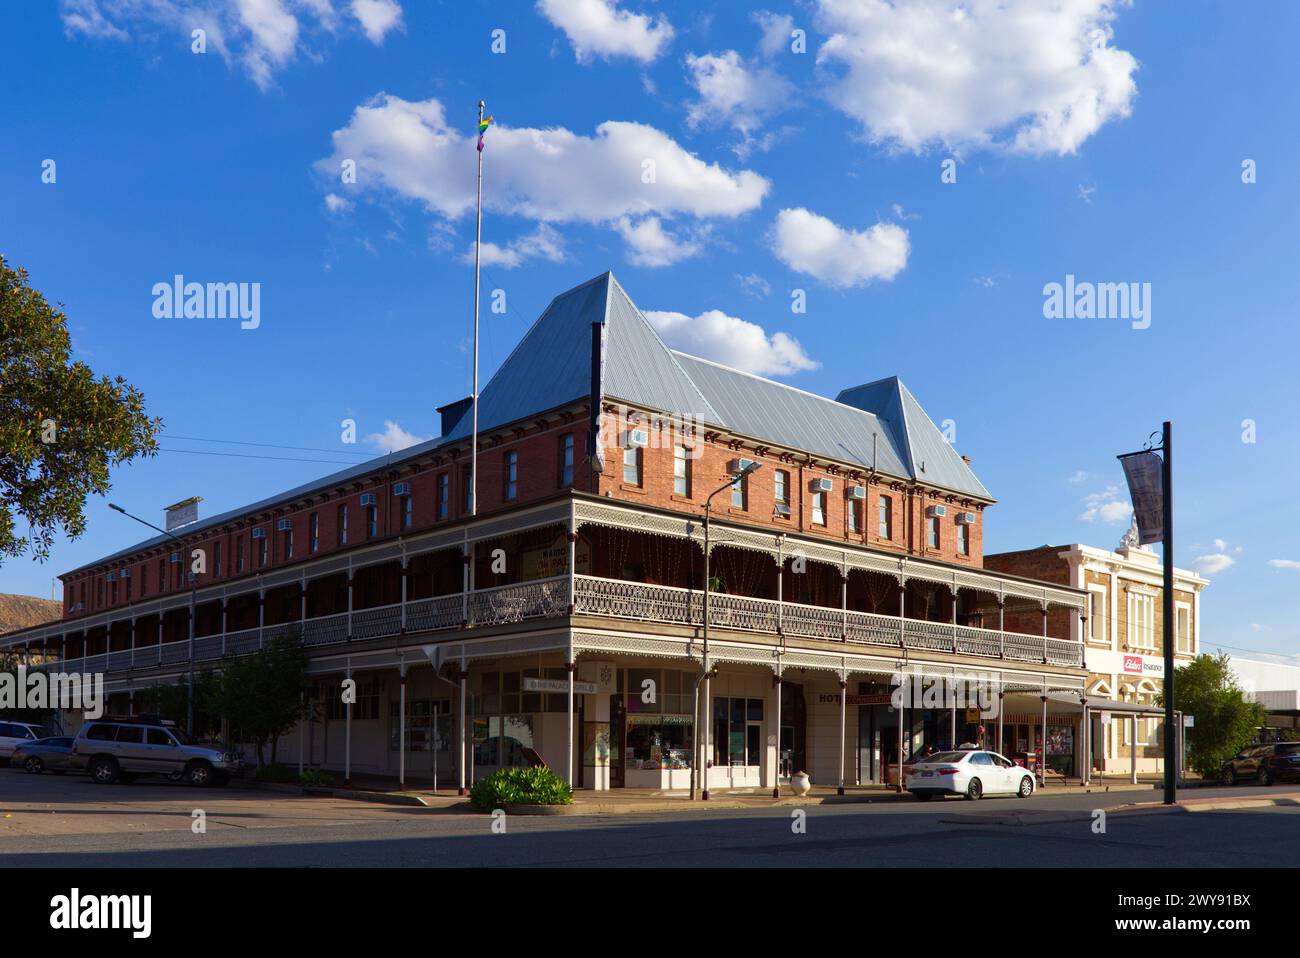 The historic Palace Hotel on Argent Street Broken Hill New South Wales Australia Stock Photo